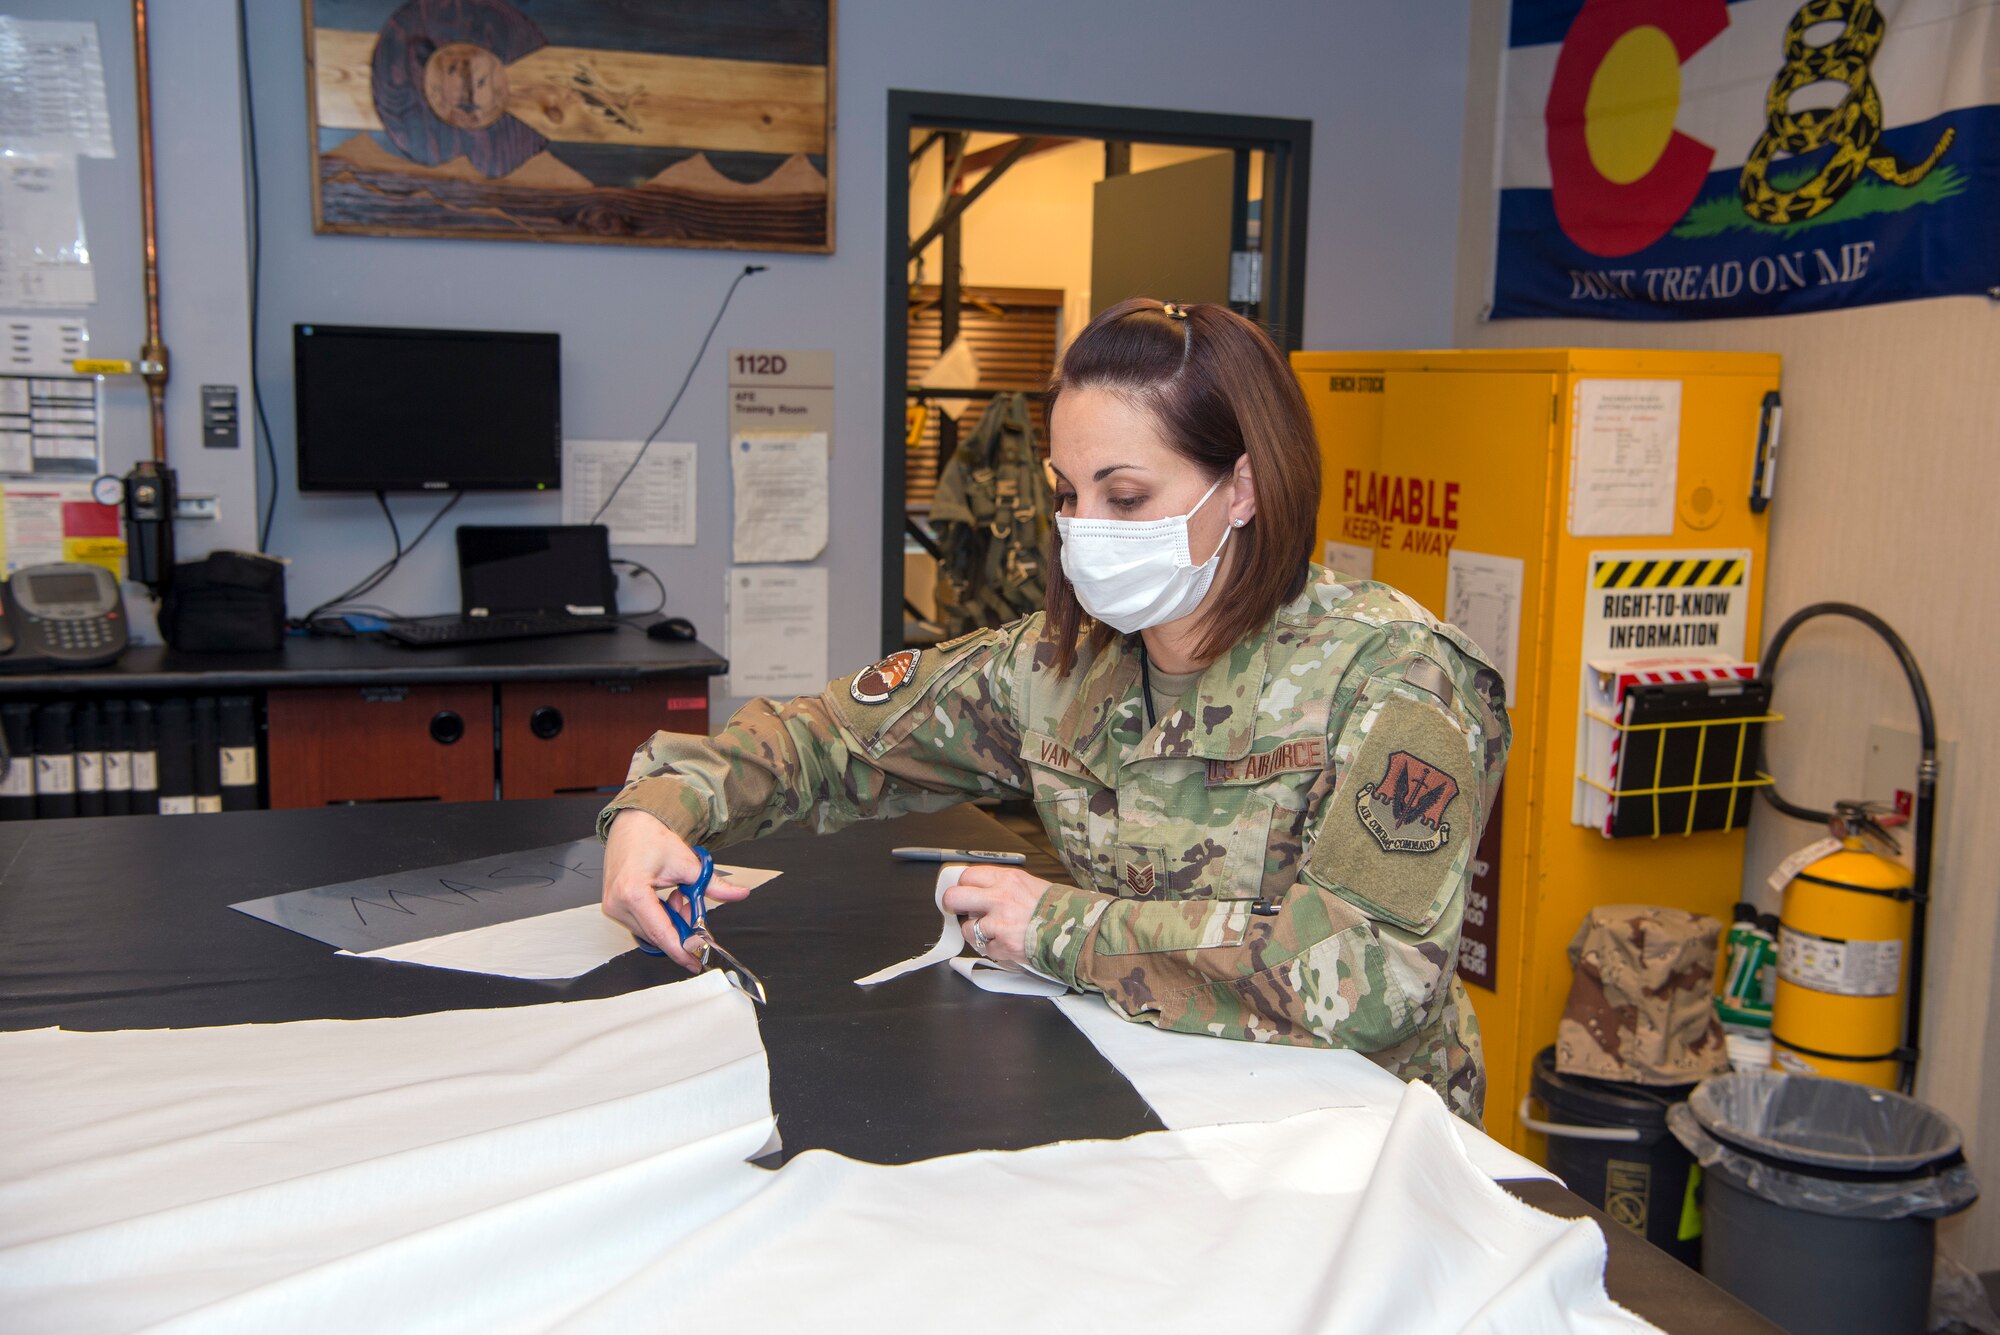 U.S. Air National Guard Tech. Sgt. Jennifer Van Note, an aircrew flight equipment specialist, is creating some of the 500 masks that have been requested by the commander of the 140th Wing, in order to decrease the chances of the COVID-19 spread while guard members have to be in close proximity of one another due to job constraints while performing vital mission operations at Buckley Air Force Base, Aurora, Colo., April 10, 2020. Members of the Colorado National Guard volunteer to support state and local officials combat the Corona Virus Pandemic by assisting multiple agencies in the state of Colorado. (U.S. Air National Guard photo by Senior Master Sgt. John Rohrer)